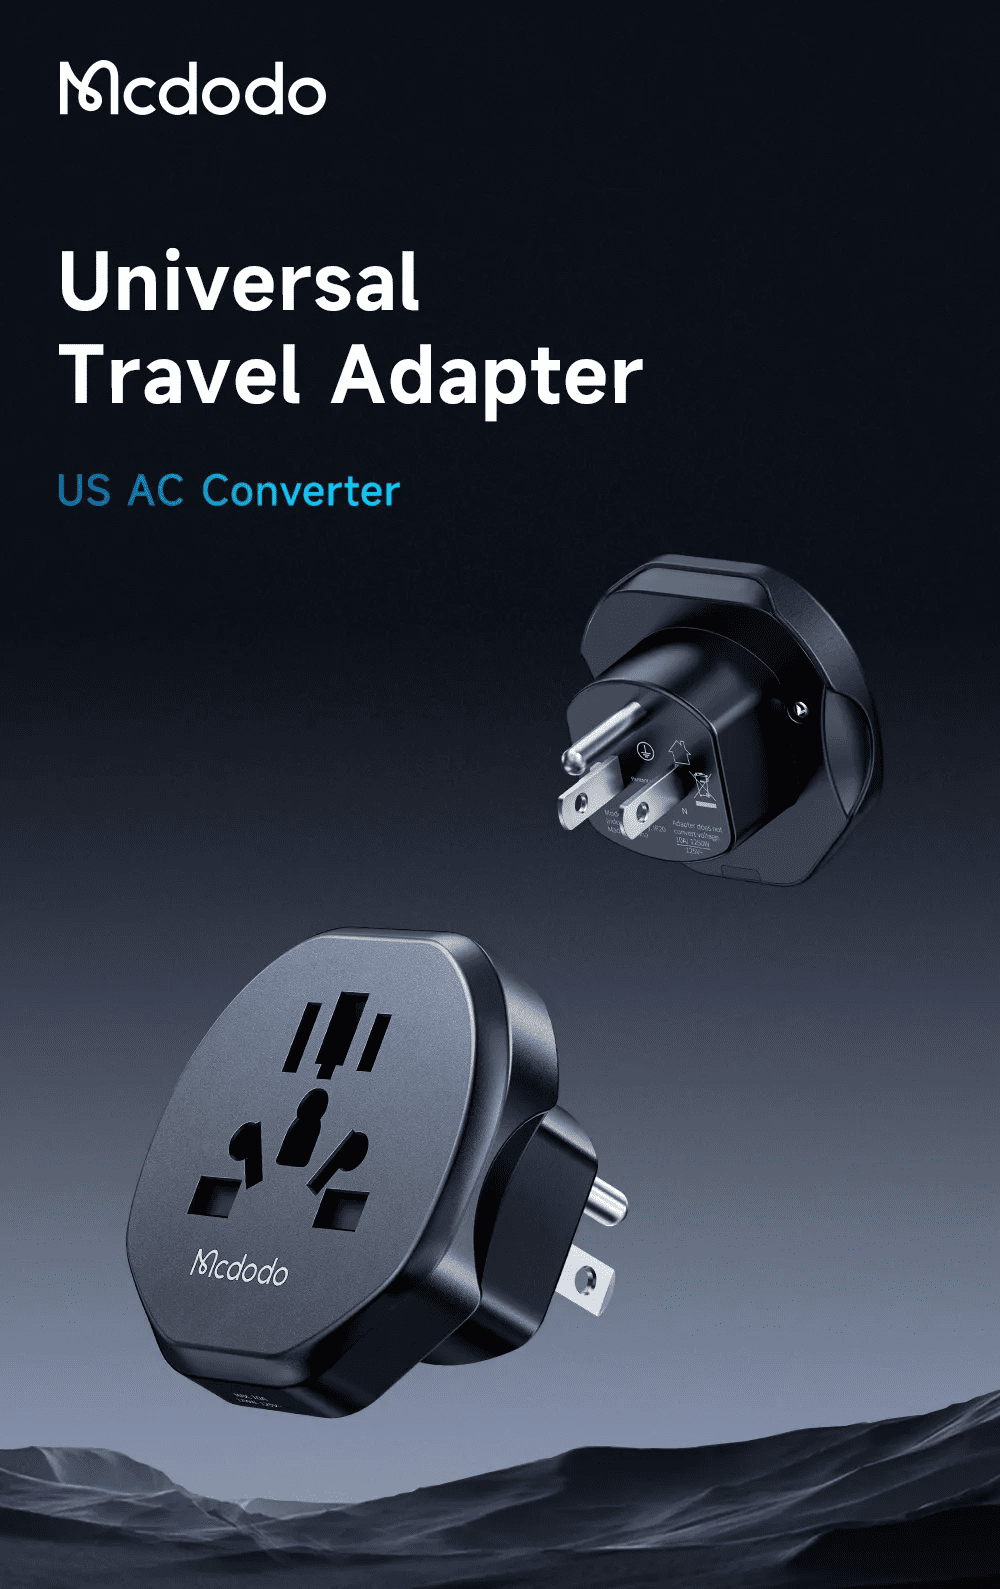 Mcdodo CP 456 Universal Travel Adapter for US 3 7